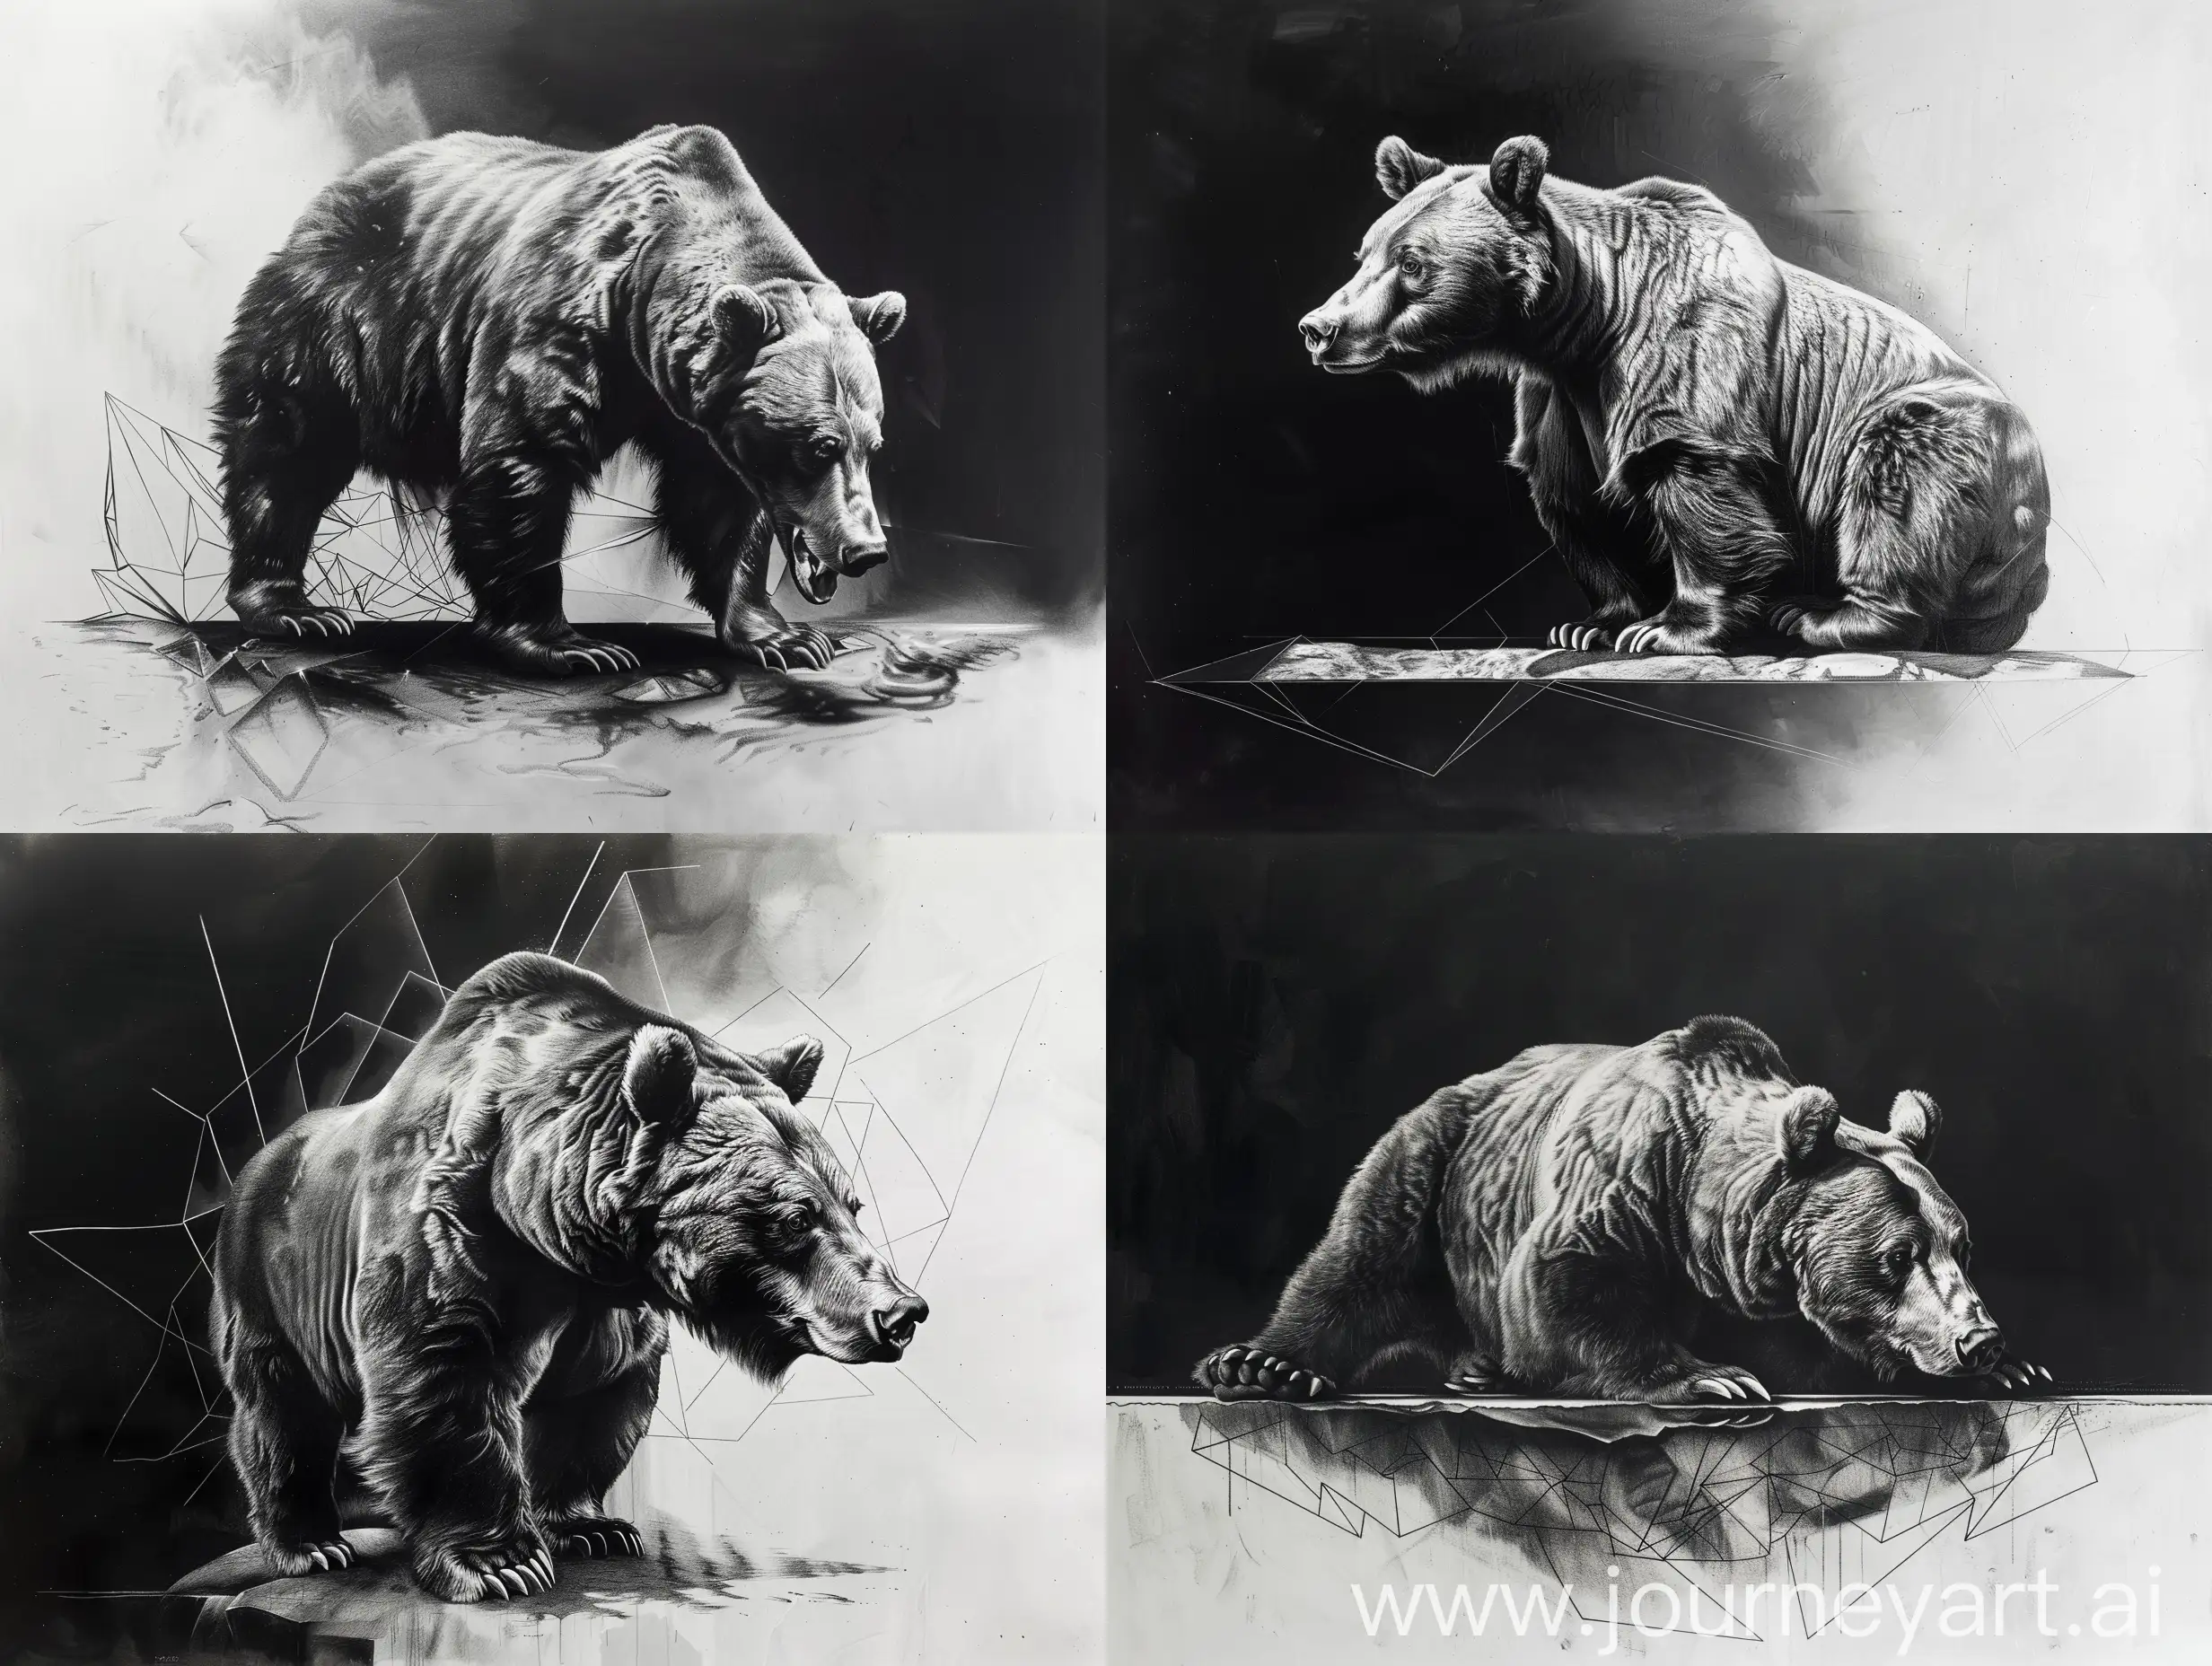 genre creative dark hyper realistic pencil sketch of a bear on a large canvas in great details with dark background
